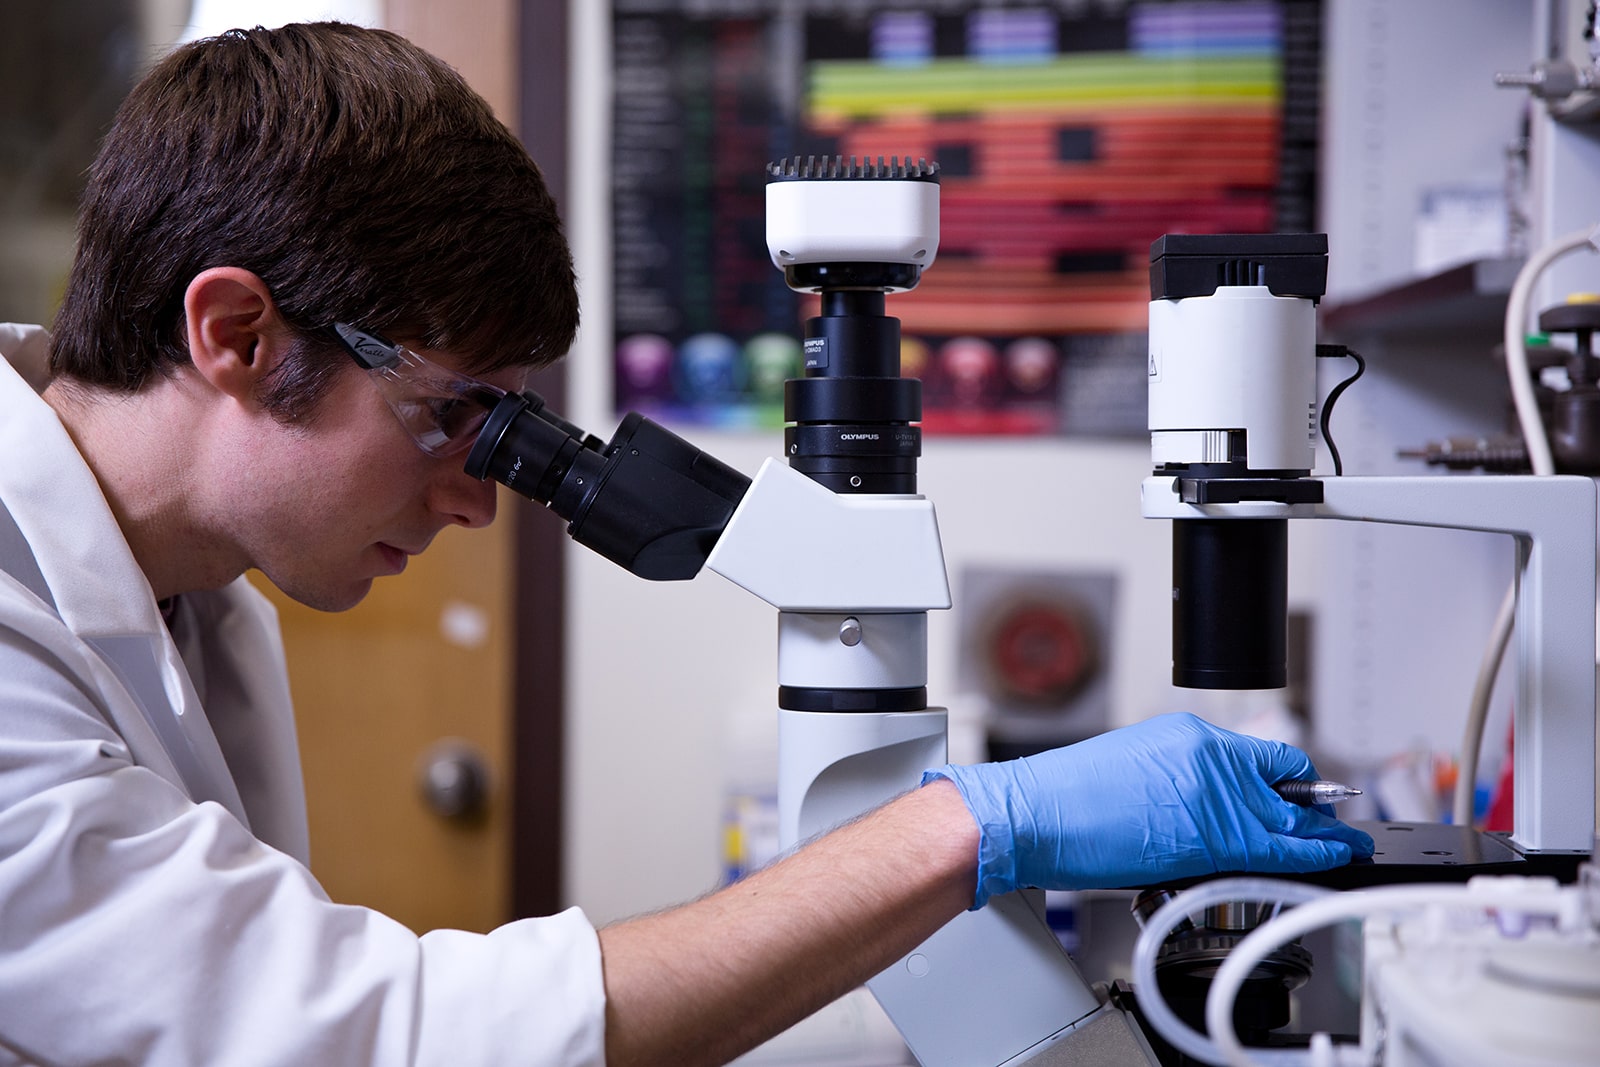 Texas biomedical engineering student looking into microscope